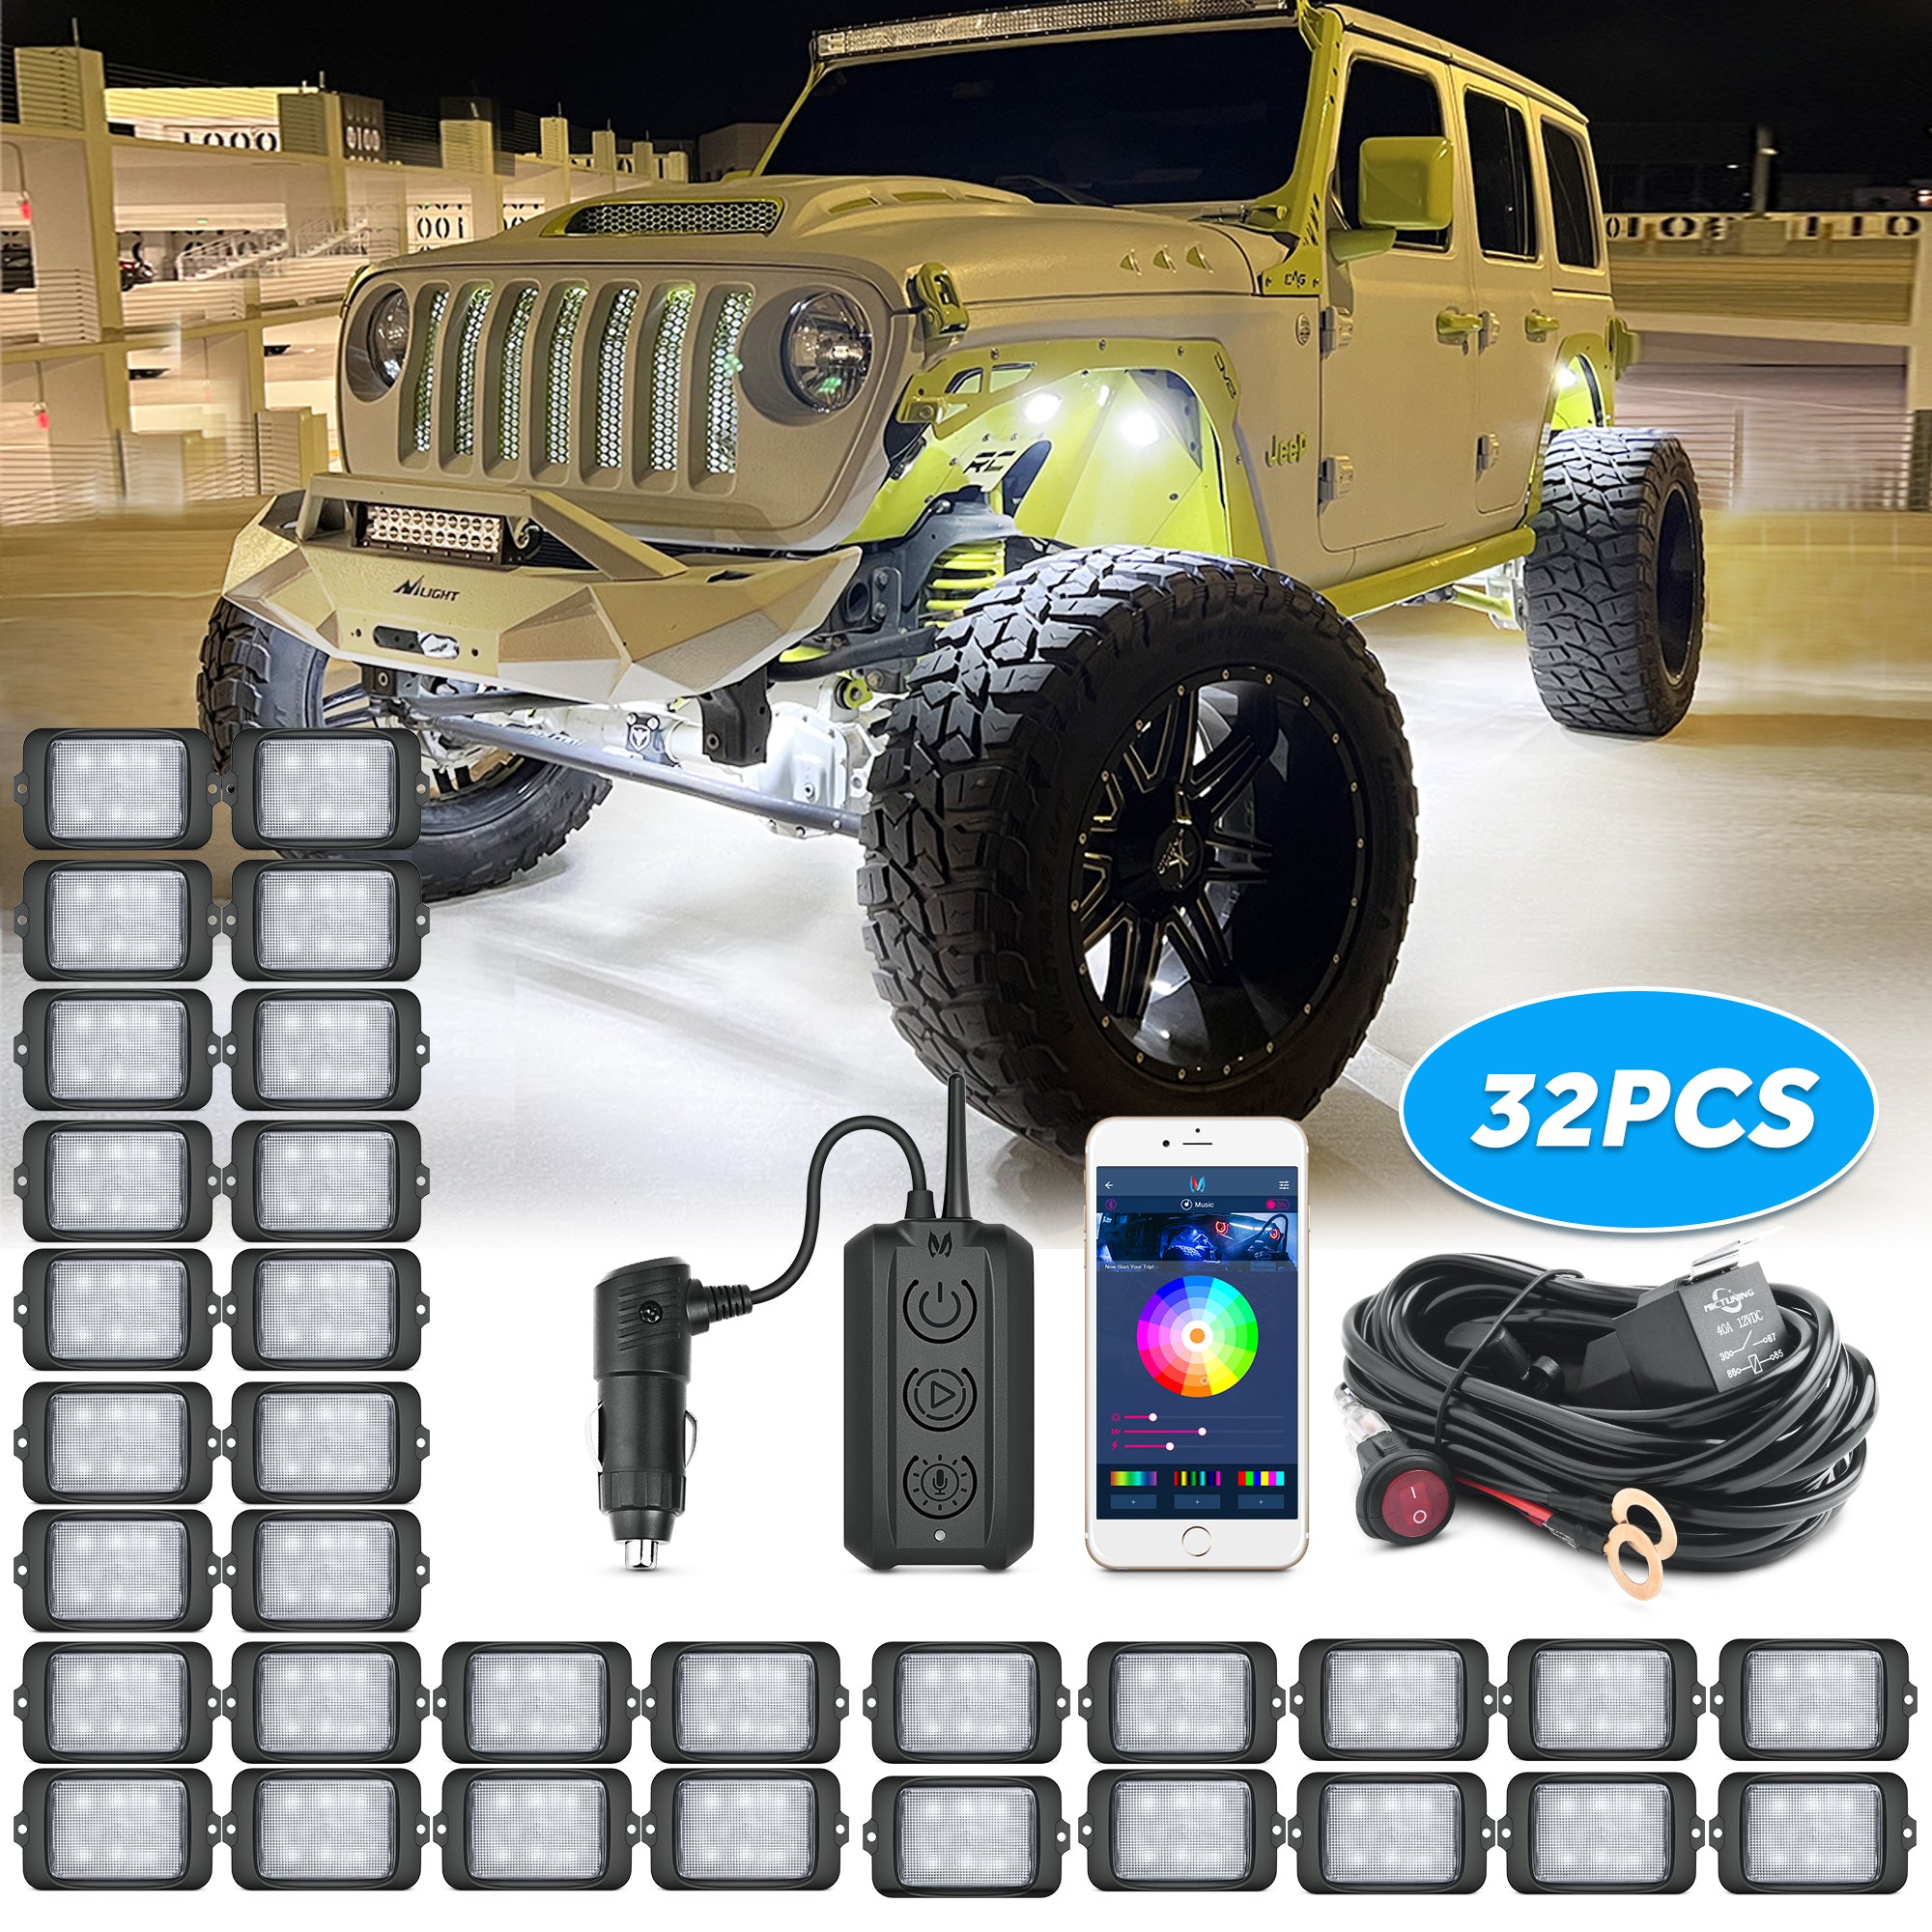 C3 Extensible RGBW LED Rock Lights - 32 Pods Wireless Control Multi-Color Neon Underglow Lights